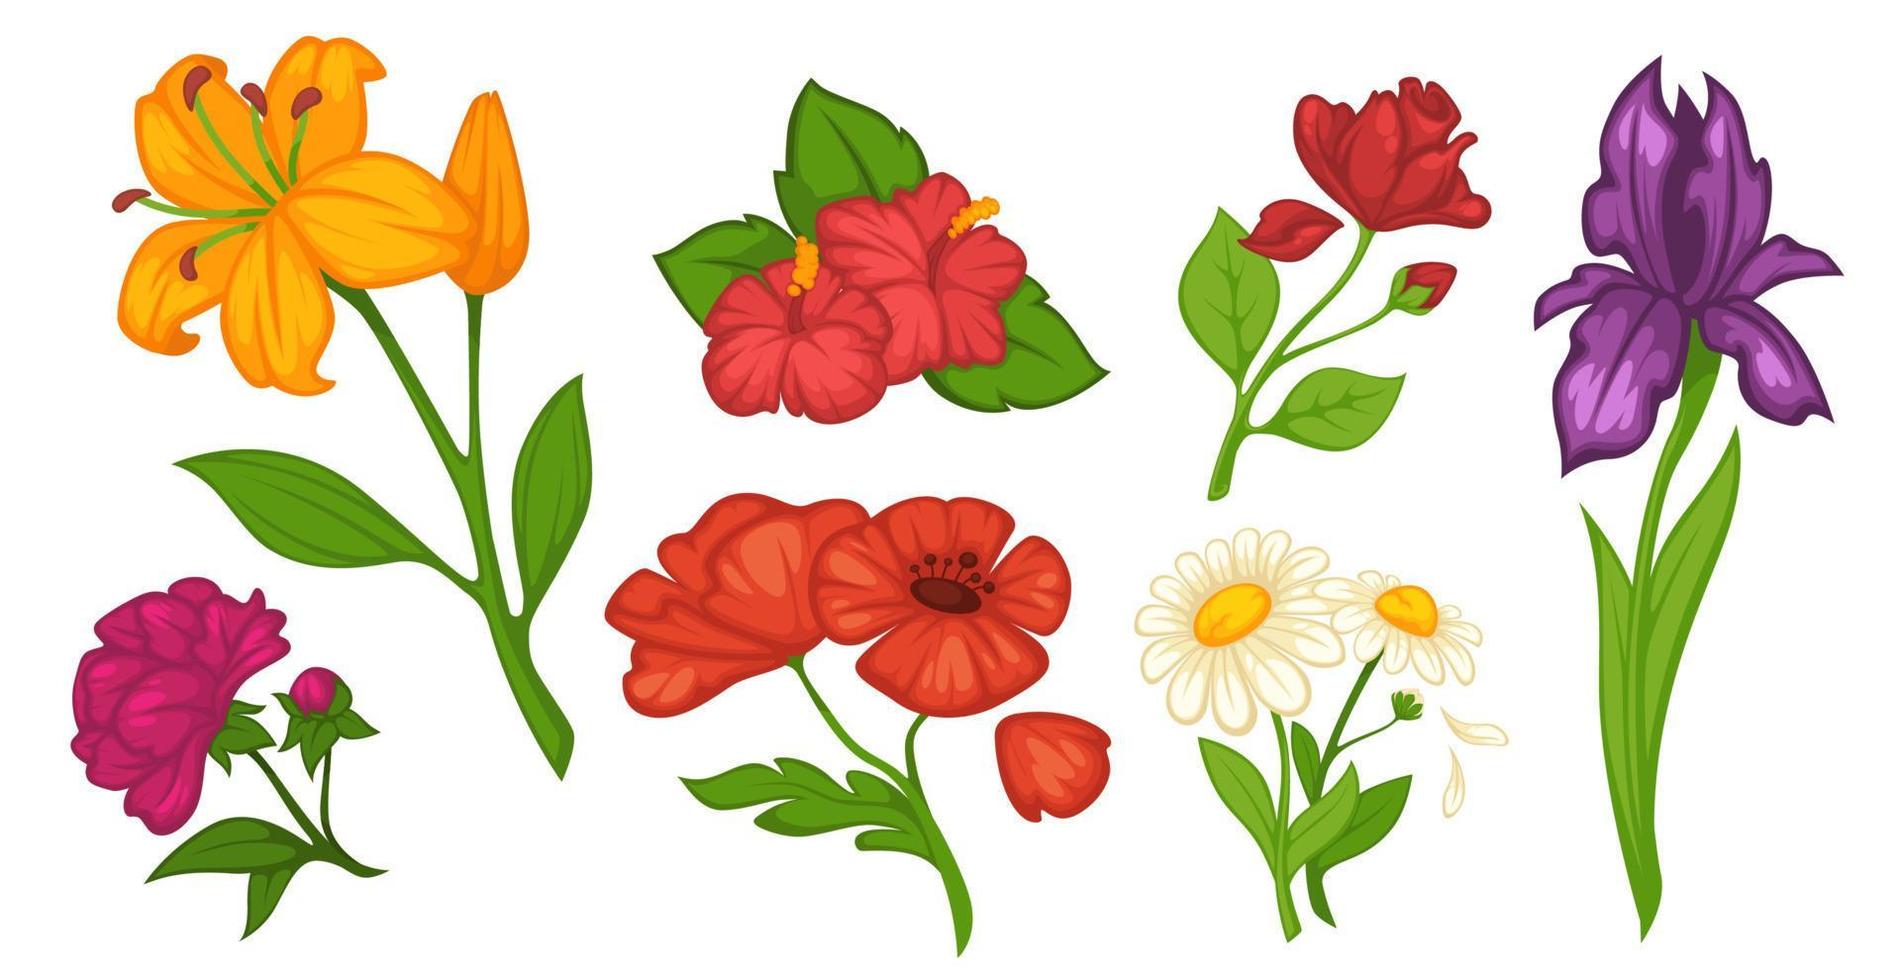 Flowers in blossom, lily and iris chamomile vector